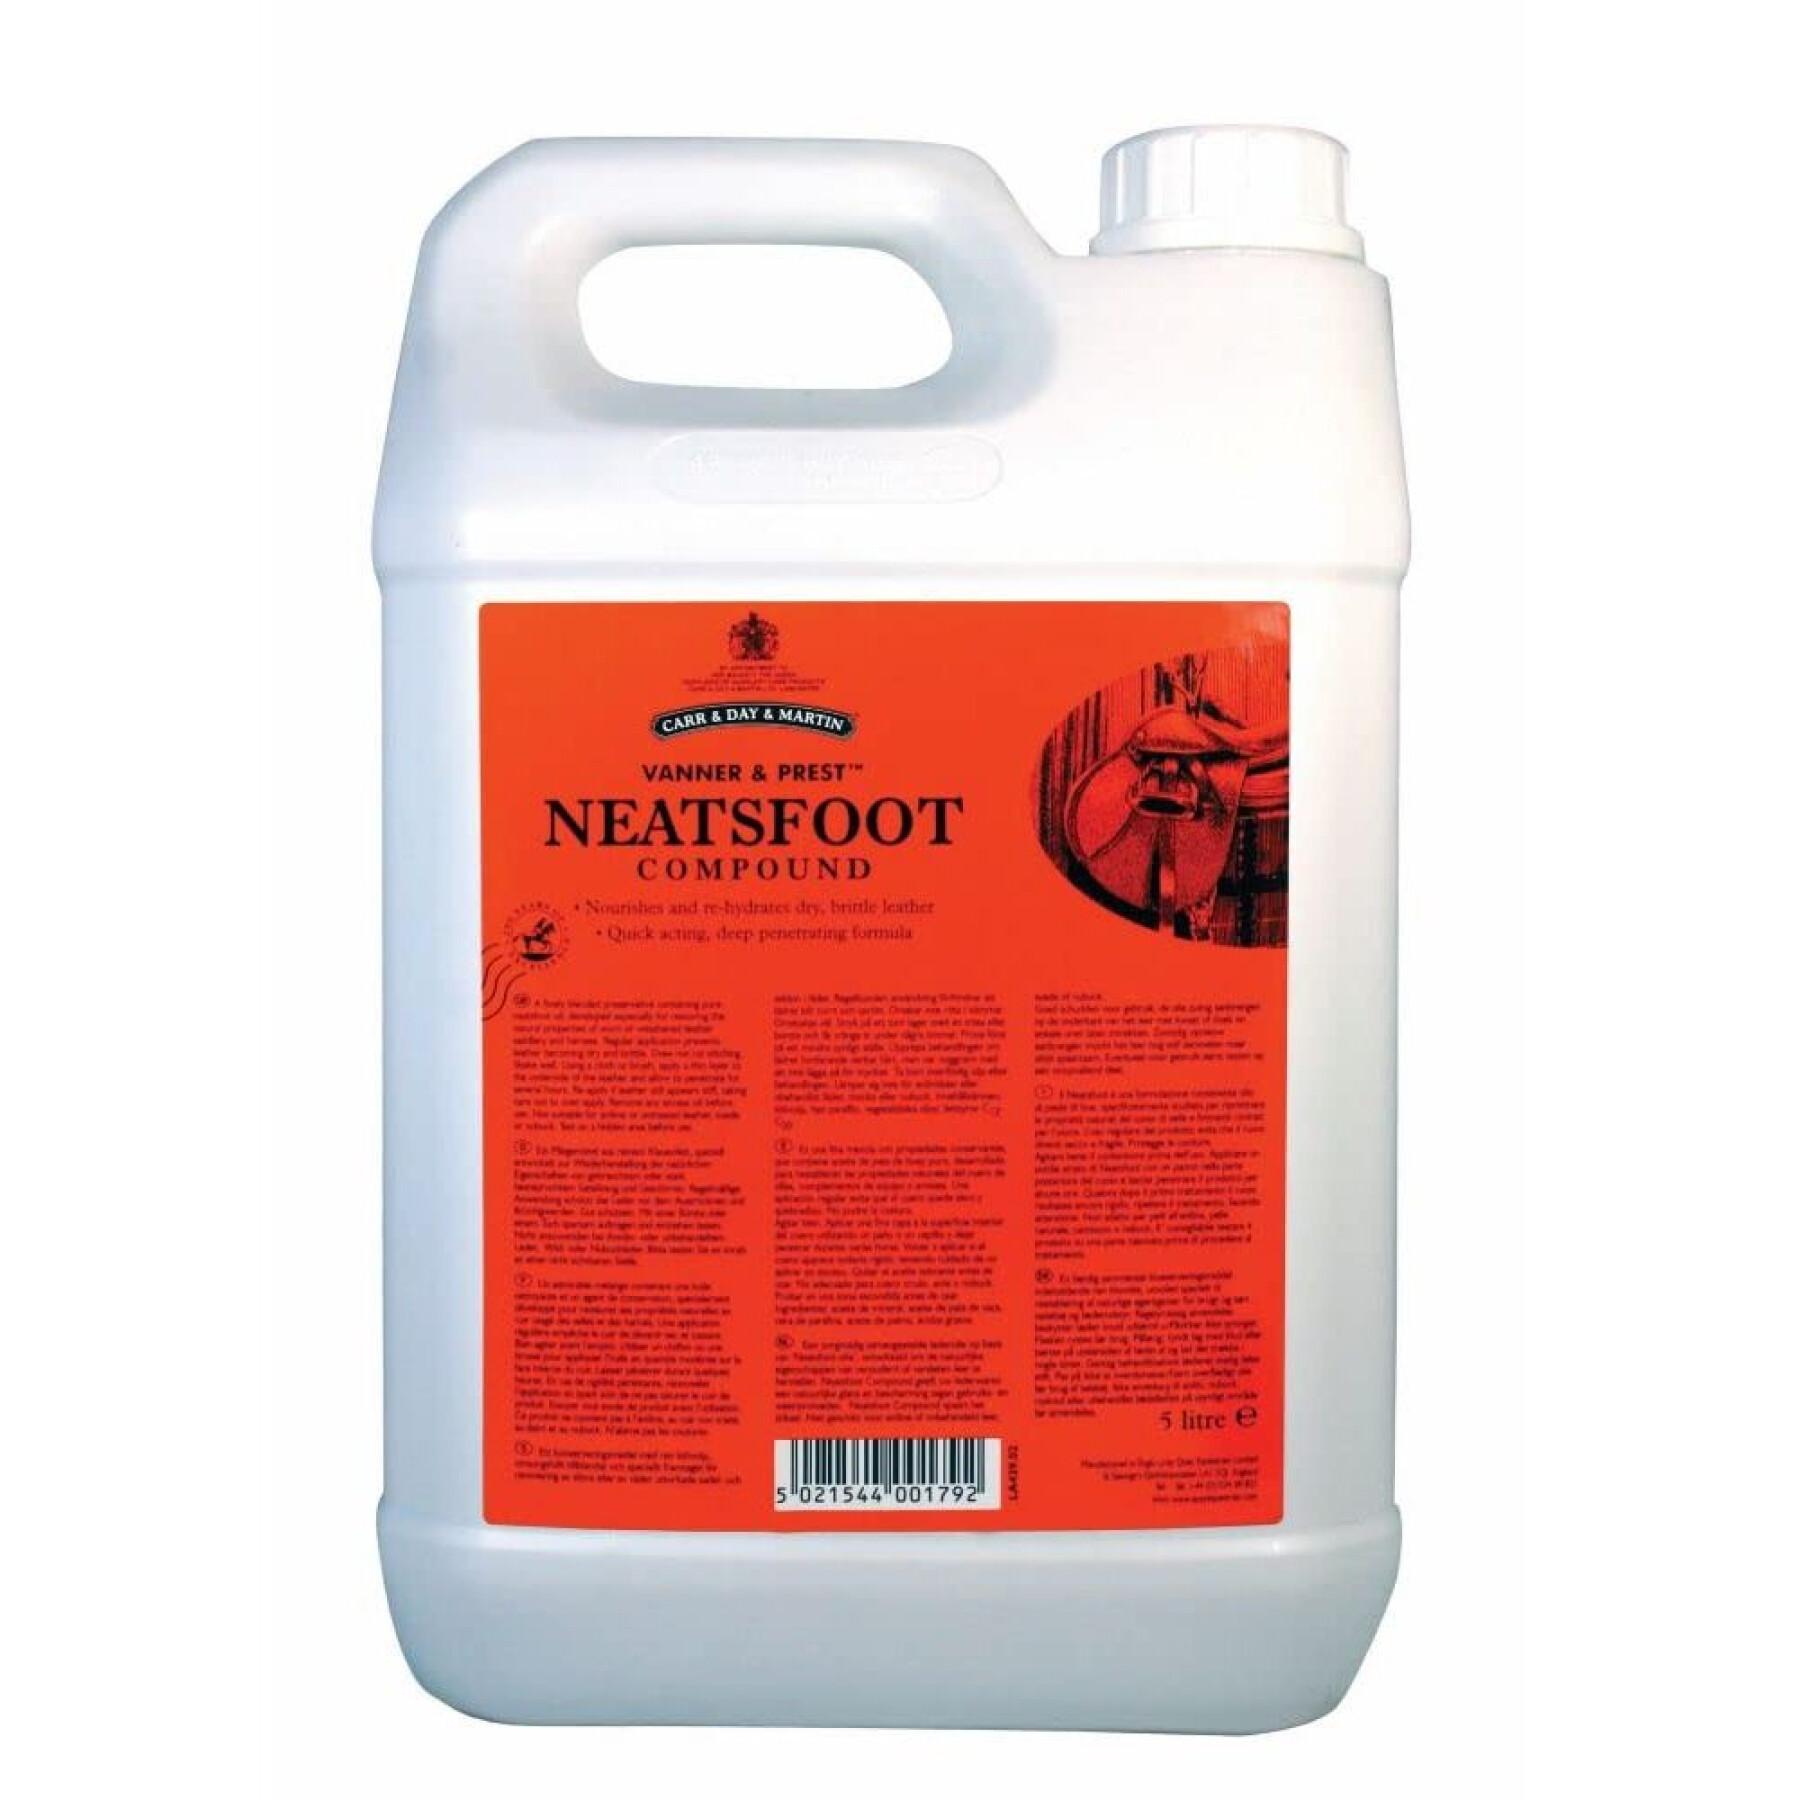 Huile pour cuir Carr&Day&Martin Vanner & prest neatsfoot compound 5l